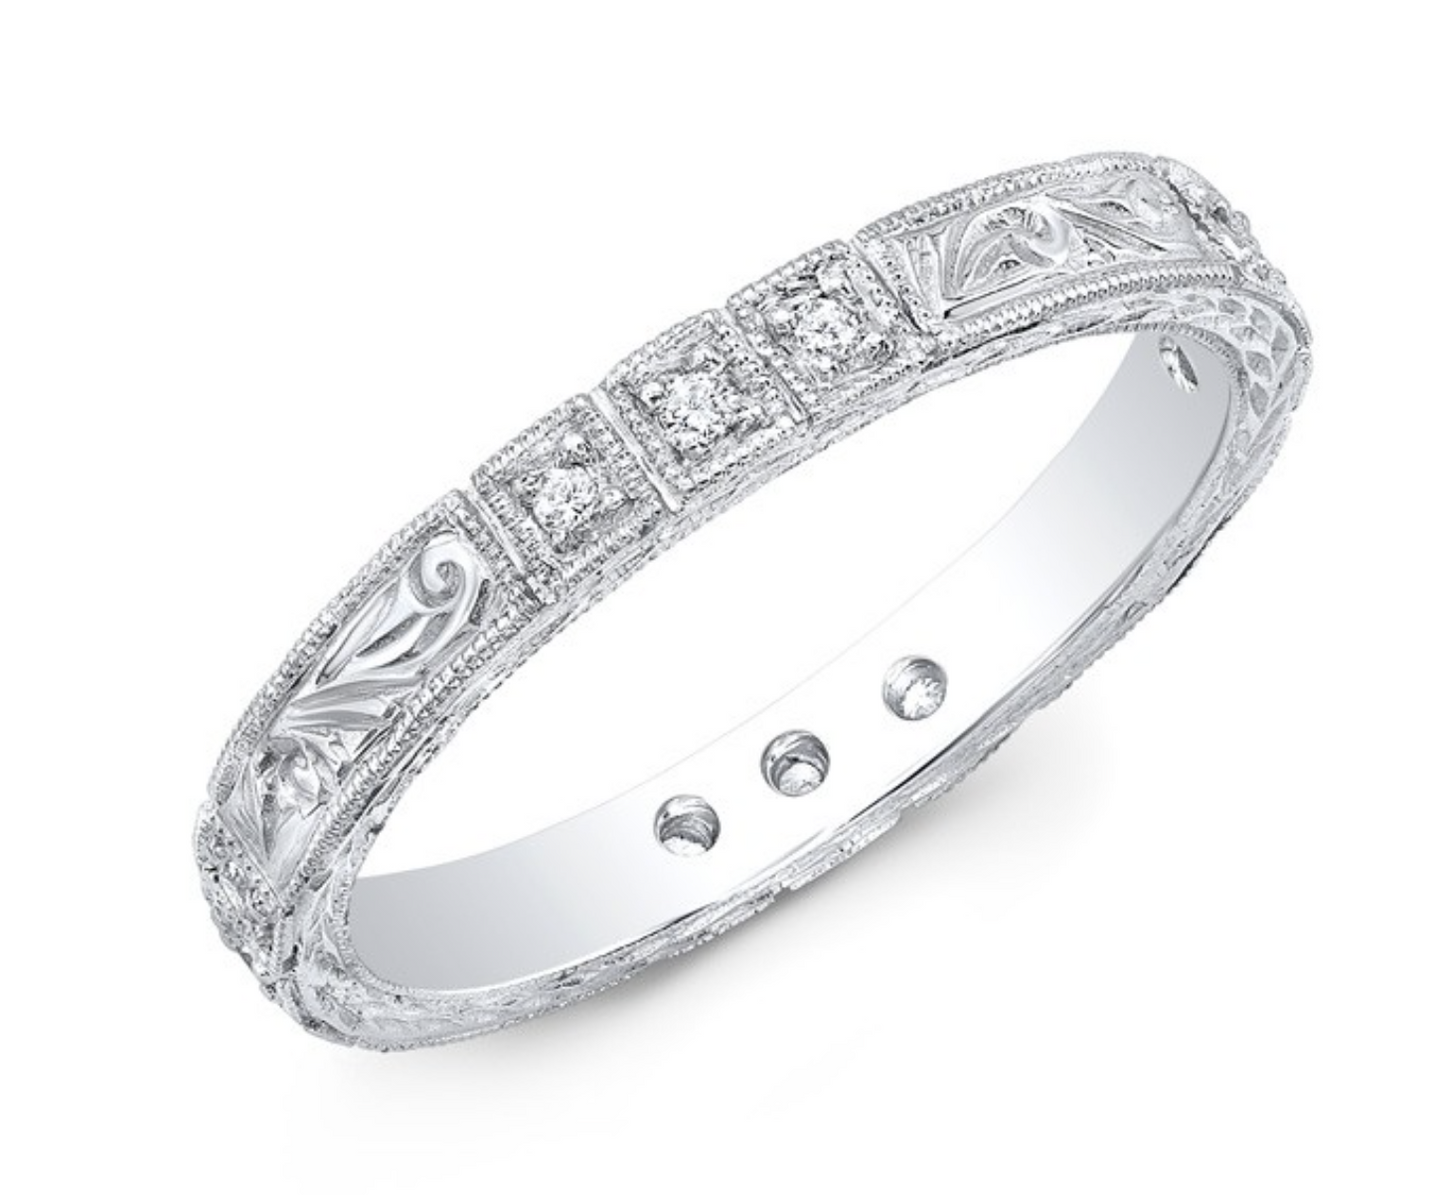 14K White Gold 0.10 CT Diamond Band Ring Engraved Paisley Carved Wedding Anniversary